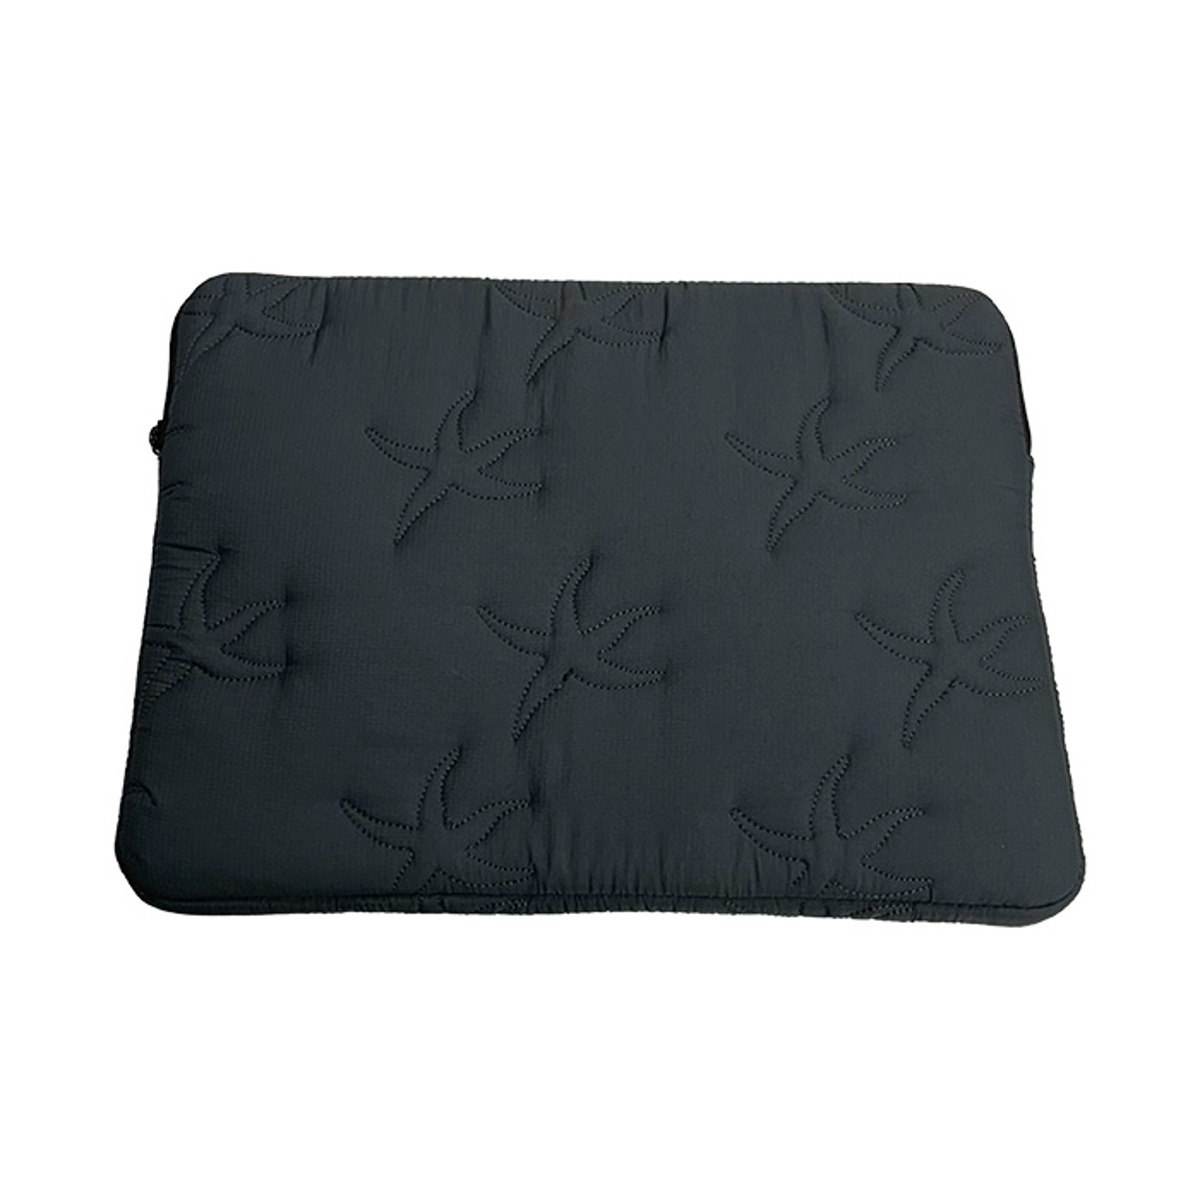 TCM starfish notebook pouch (charcoal)